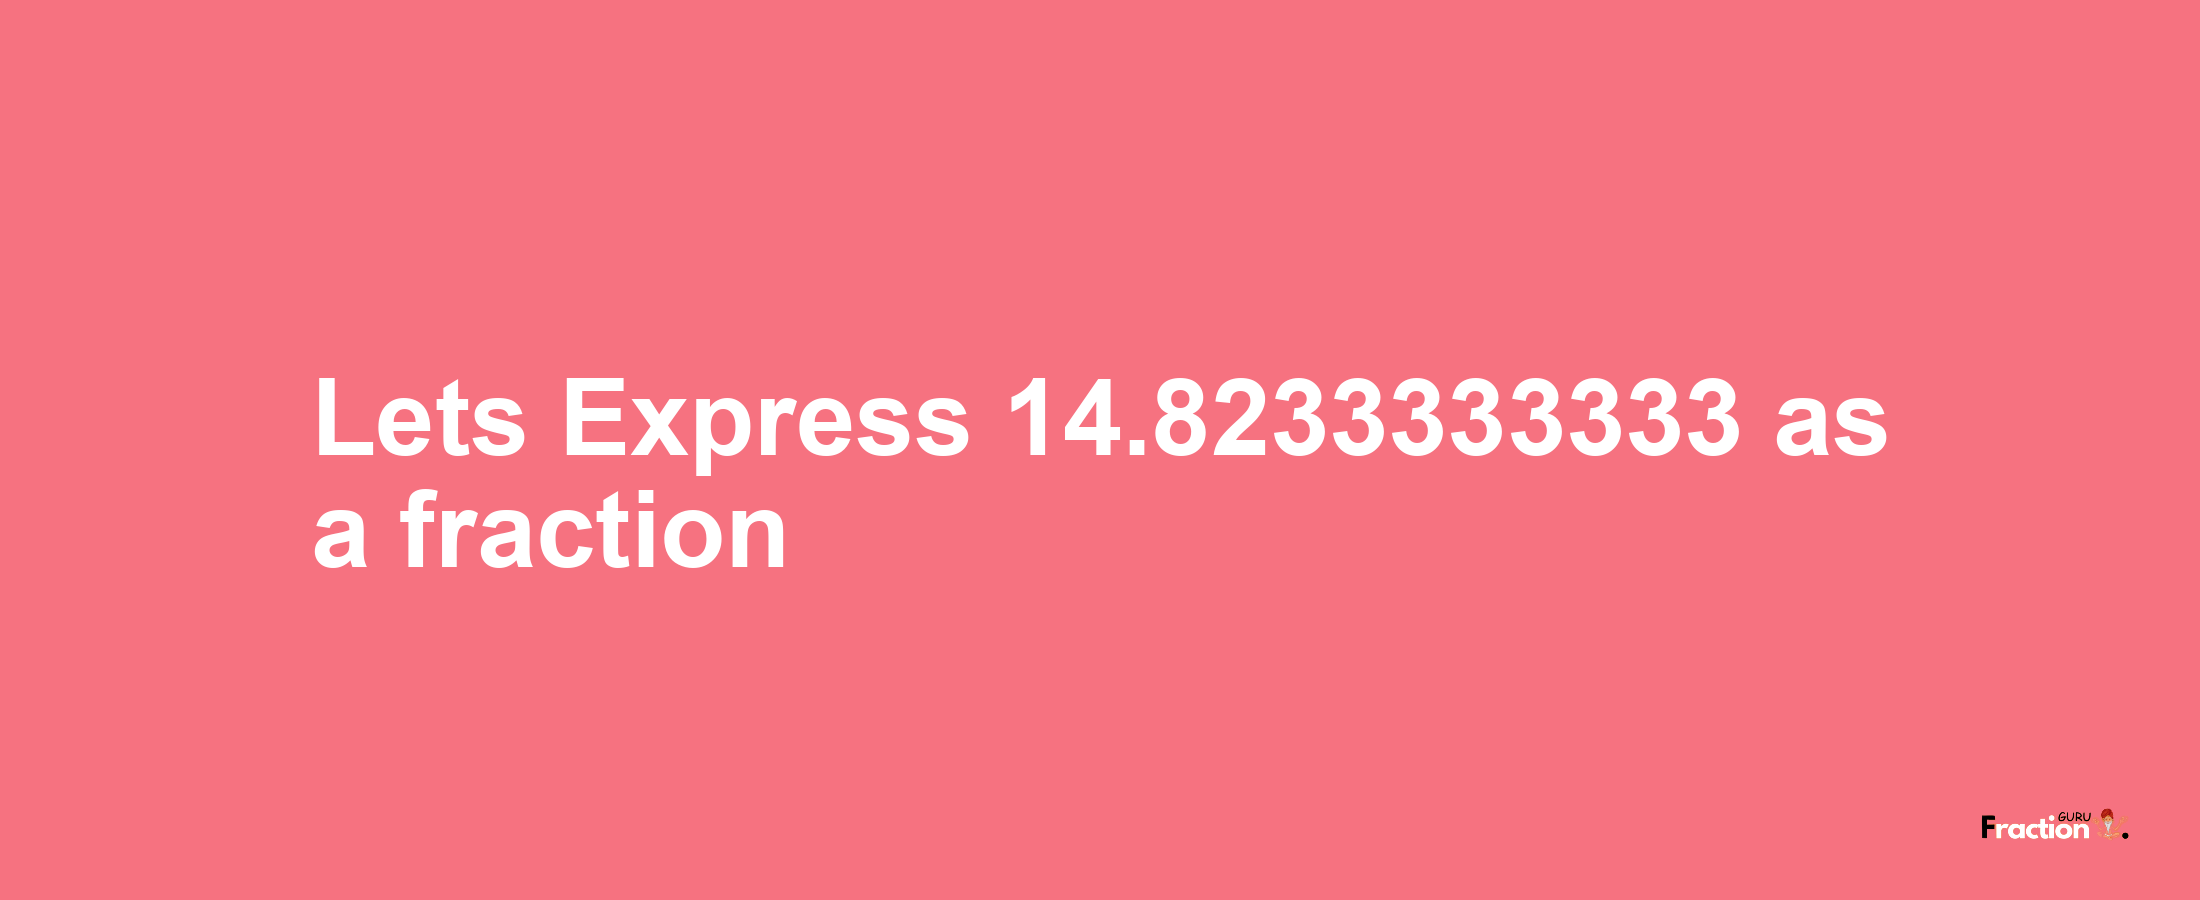 Lets Express 14.8233333333 as afraction